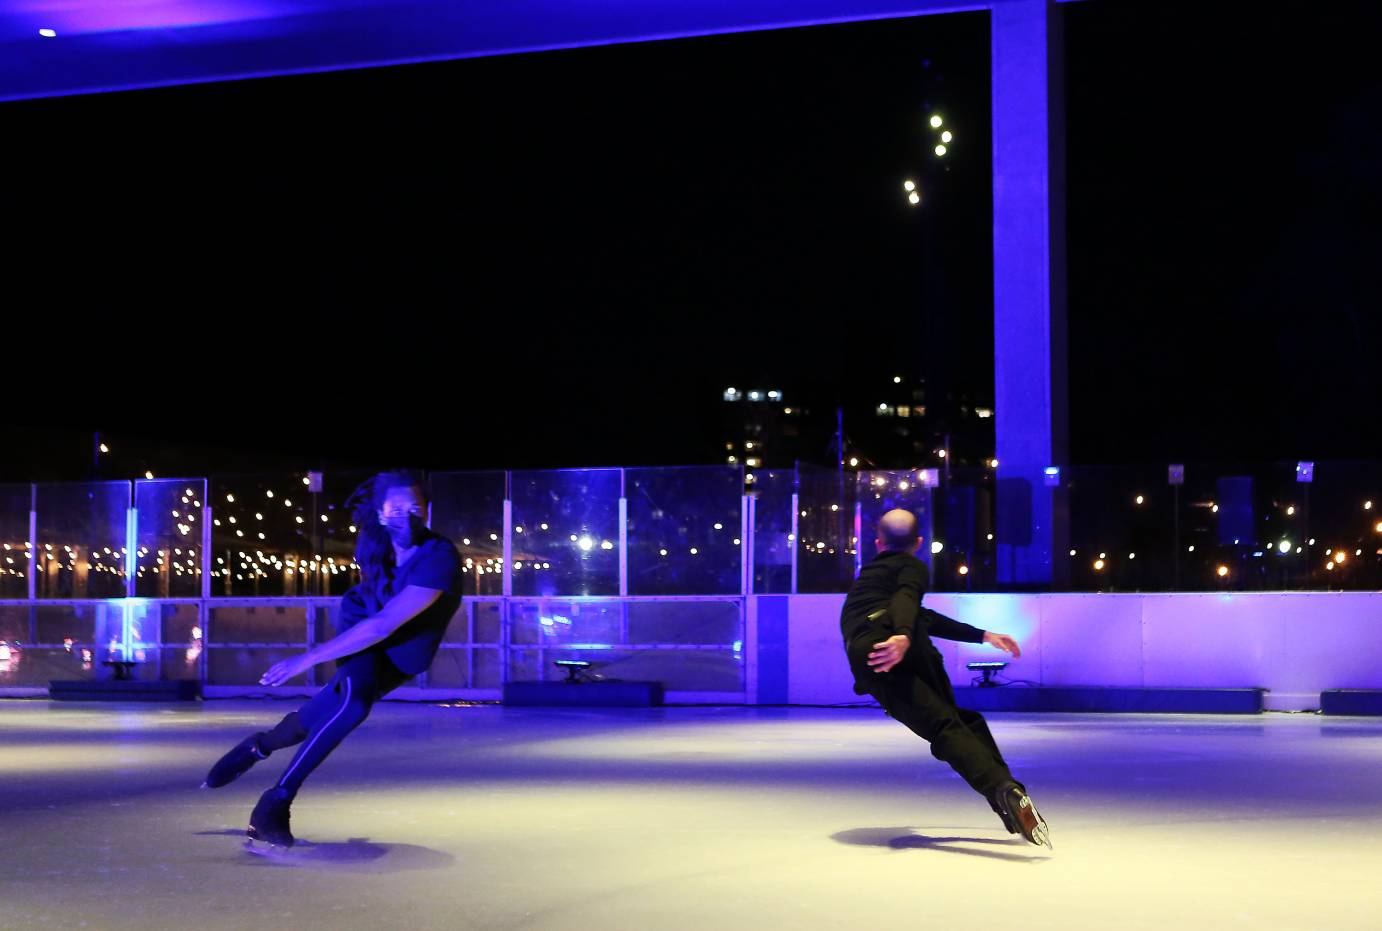 Two skaters stroke across the ice, passing each other